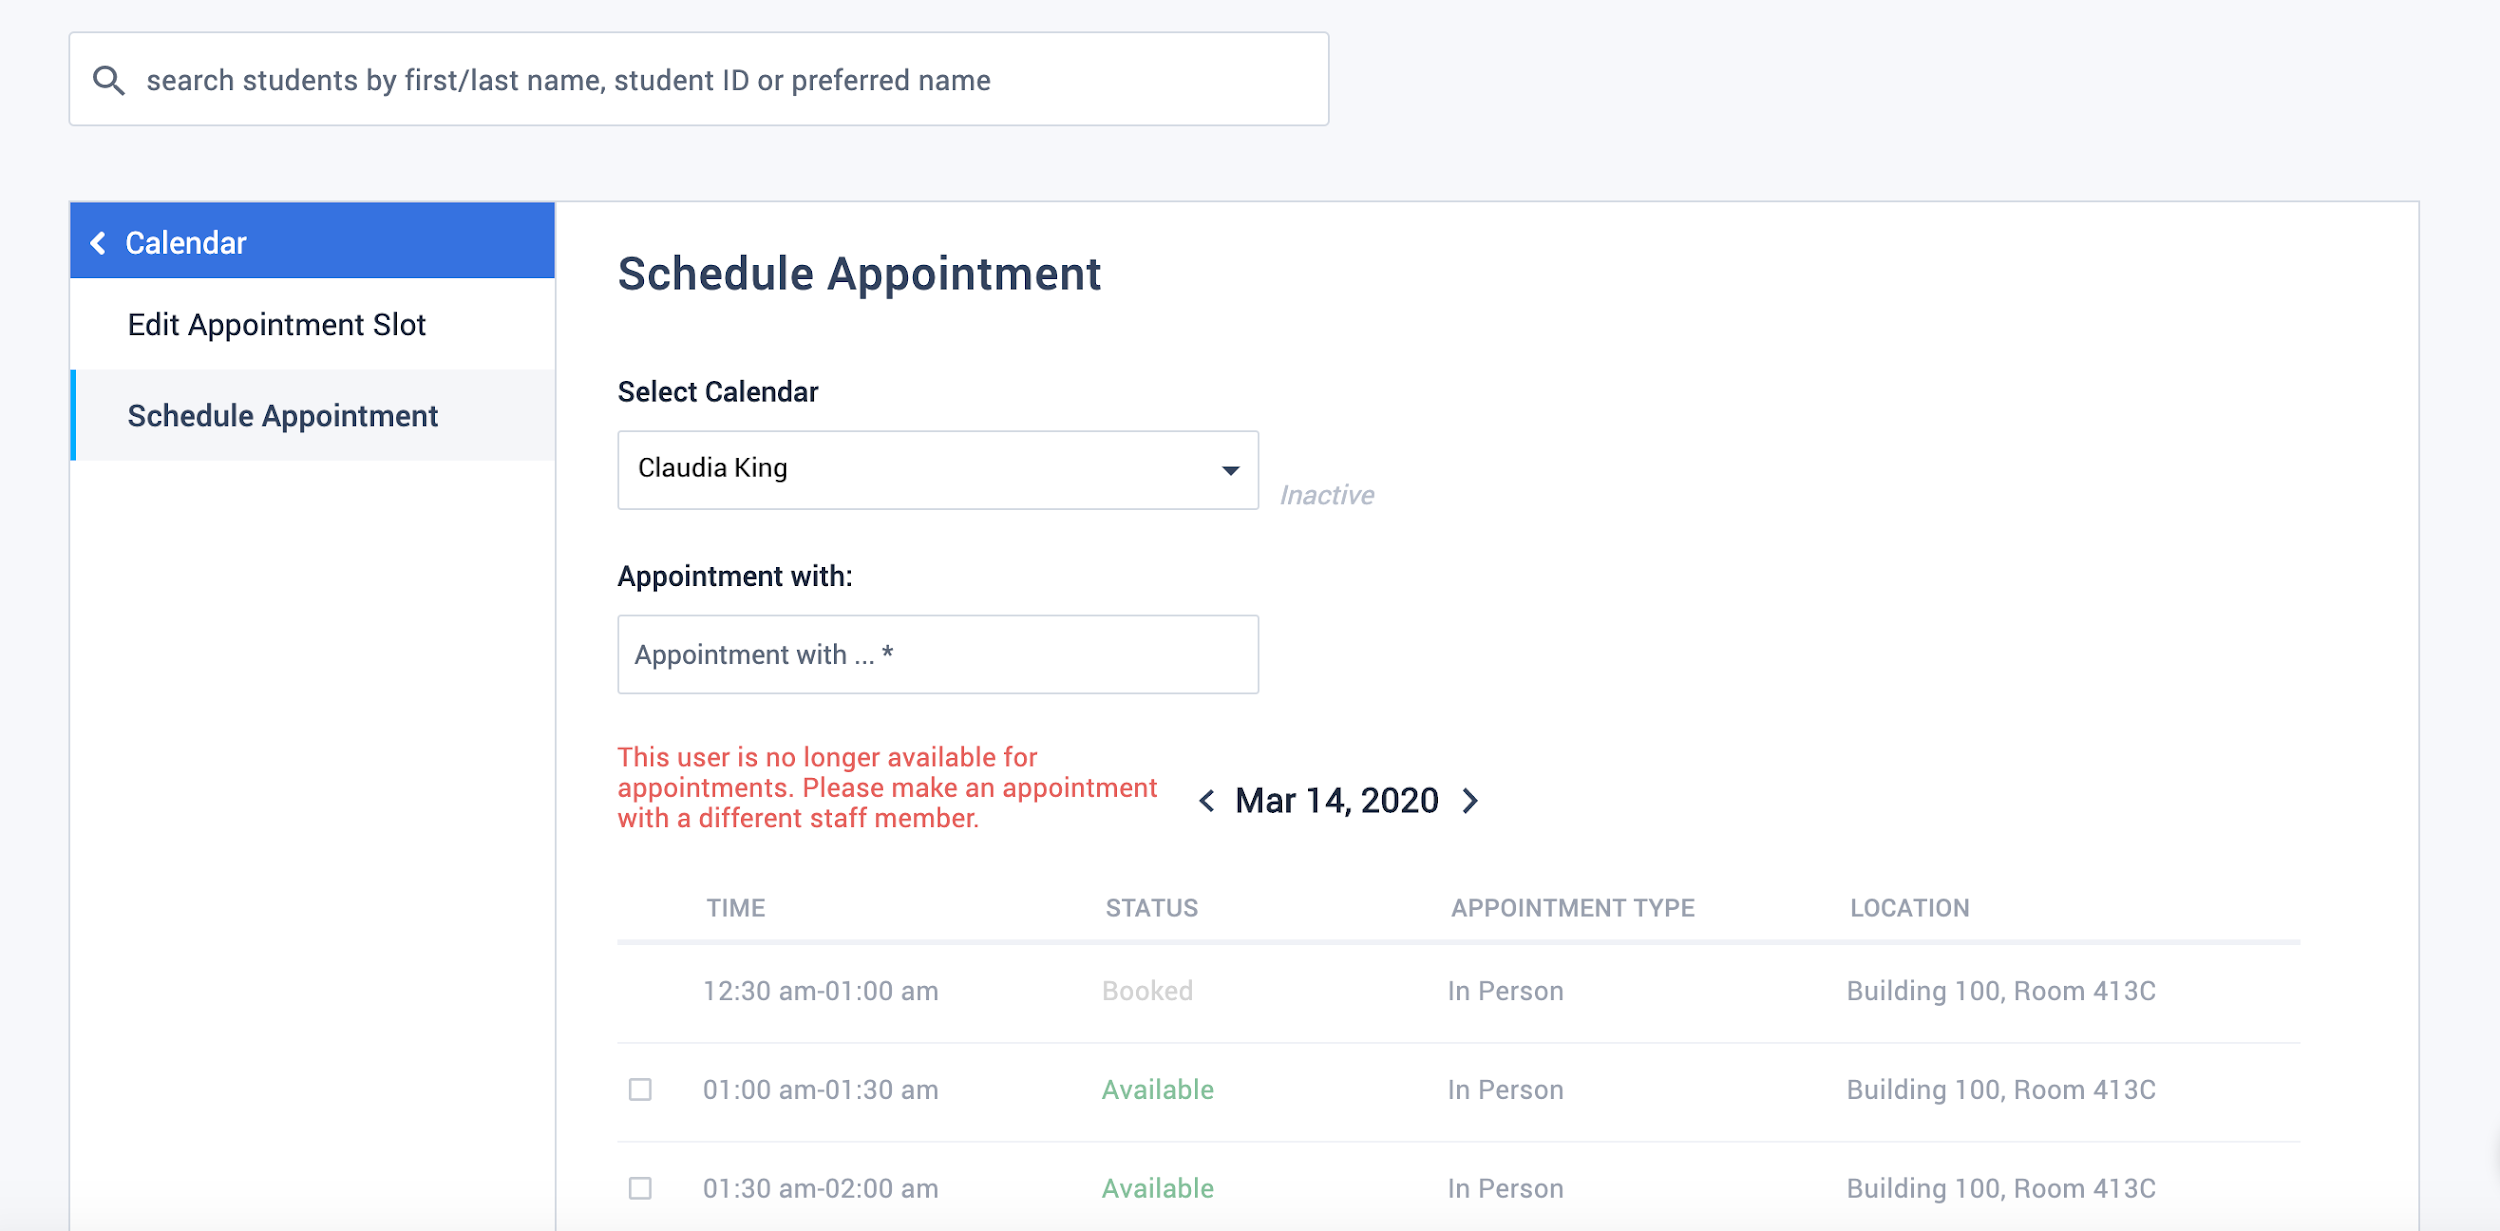 When editing an appointment, the student will be notified that the advisor is no longer an active user.